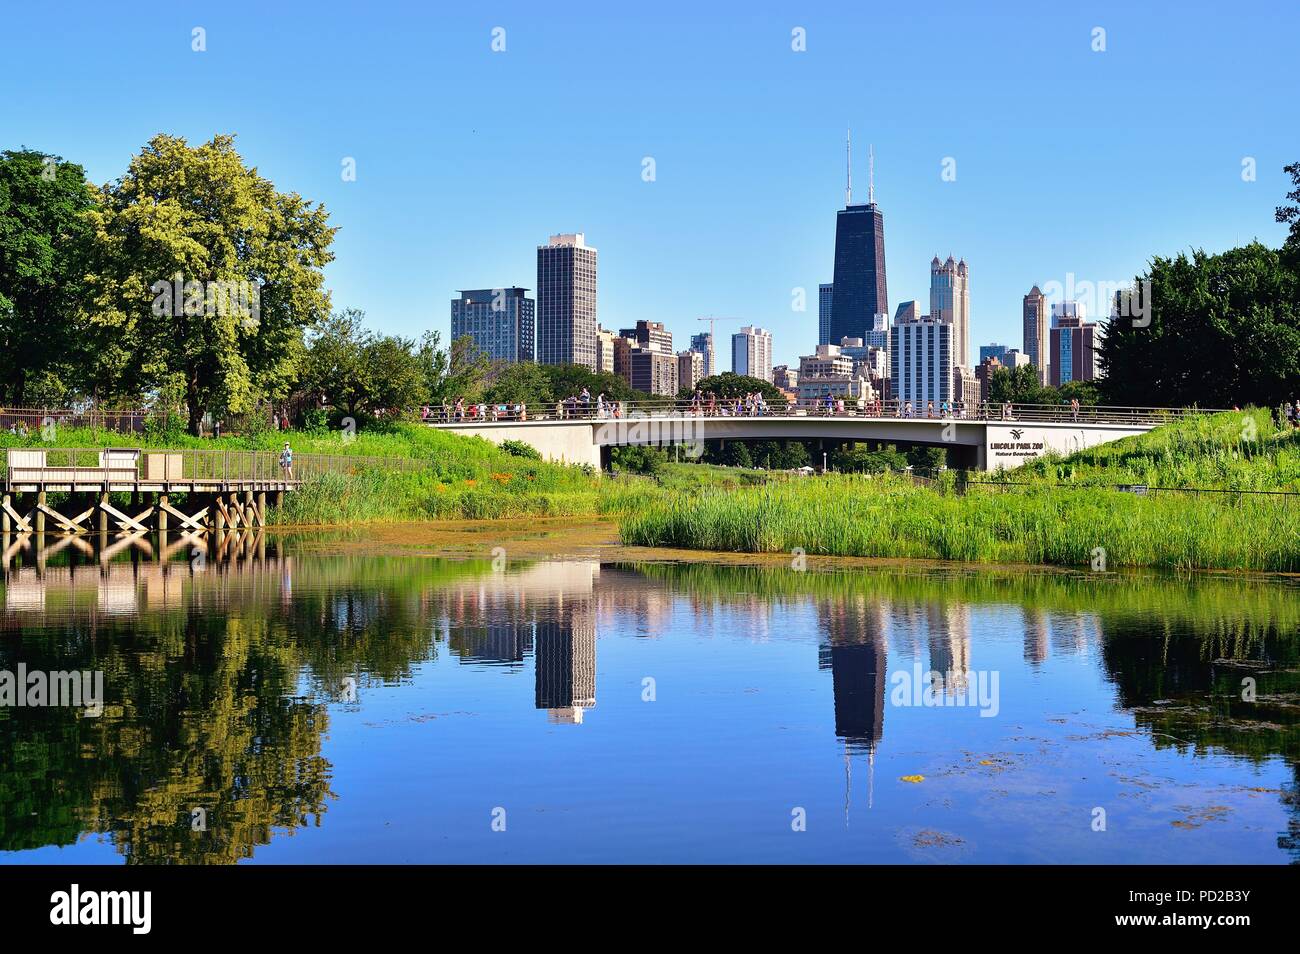 Chicago, Illinois, USA. A segment of the city skyline refelcting in the South Pond at Lincoln Park Zoo on a summer afternoon. Stock Photo